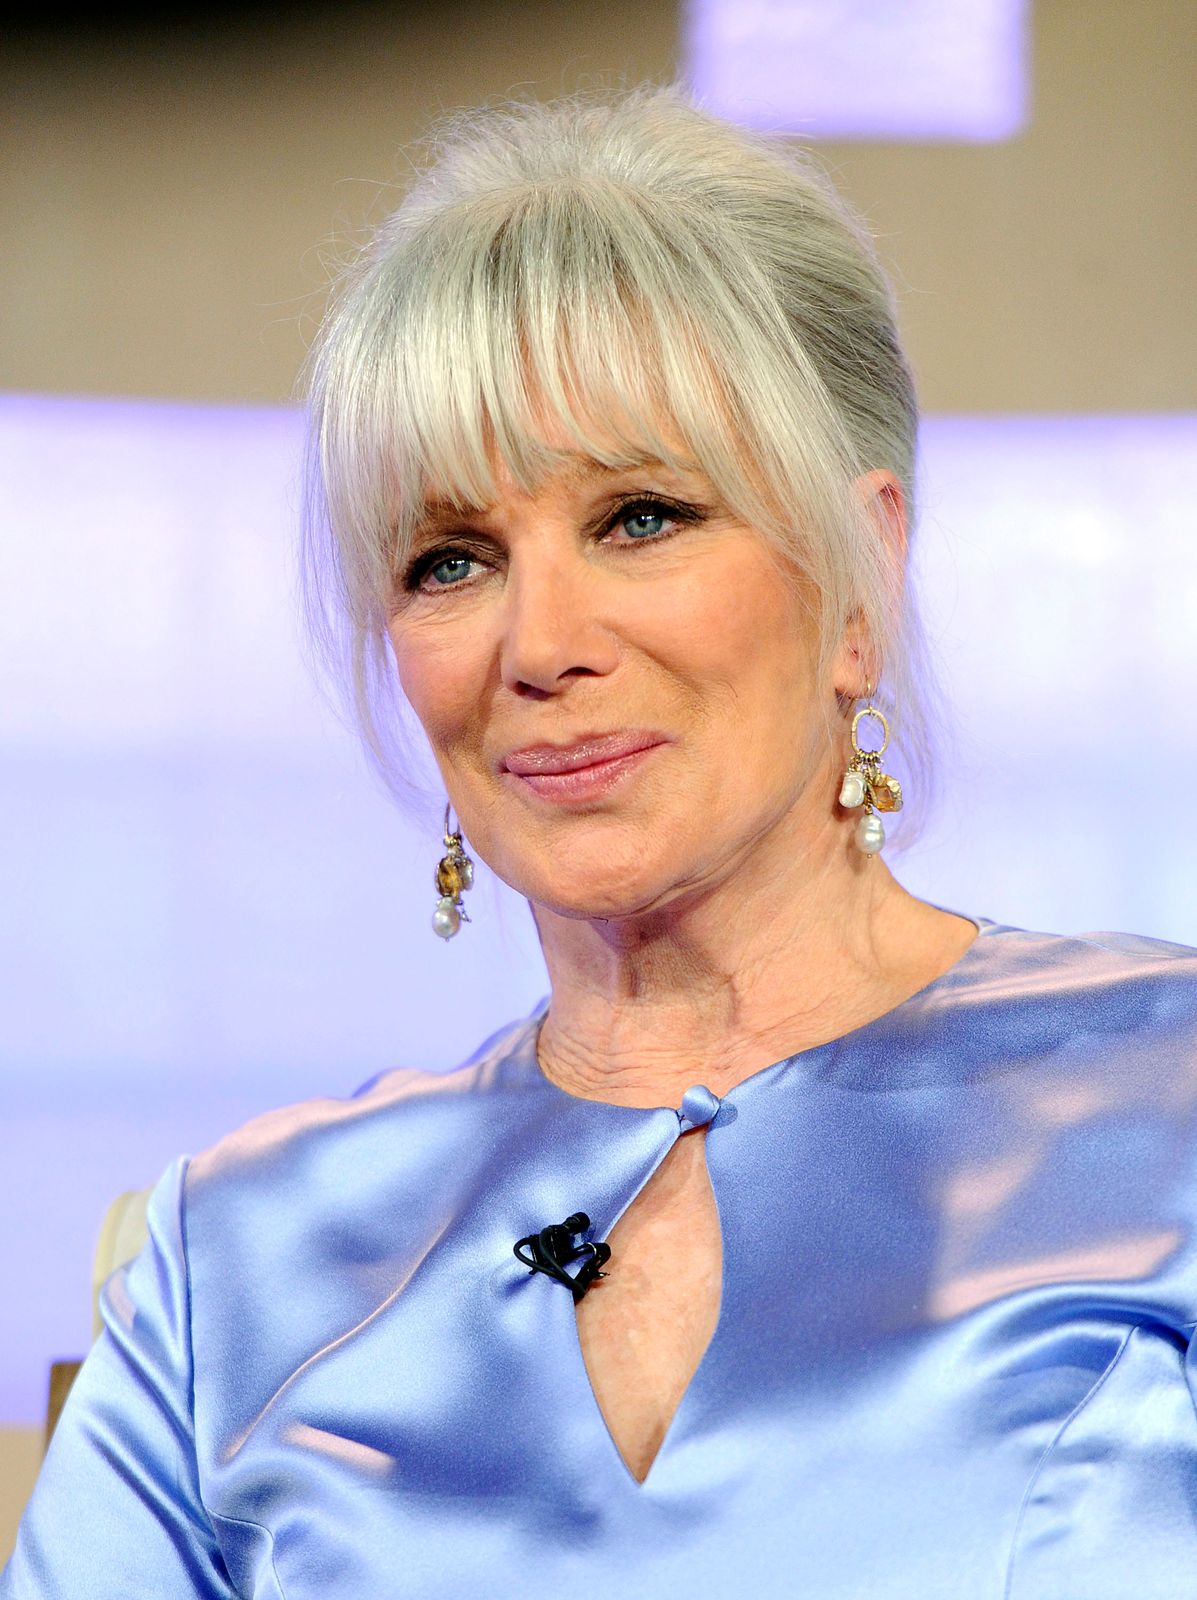 Linda Evans on NBC News' "Today" show. | Getty Images